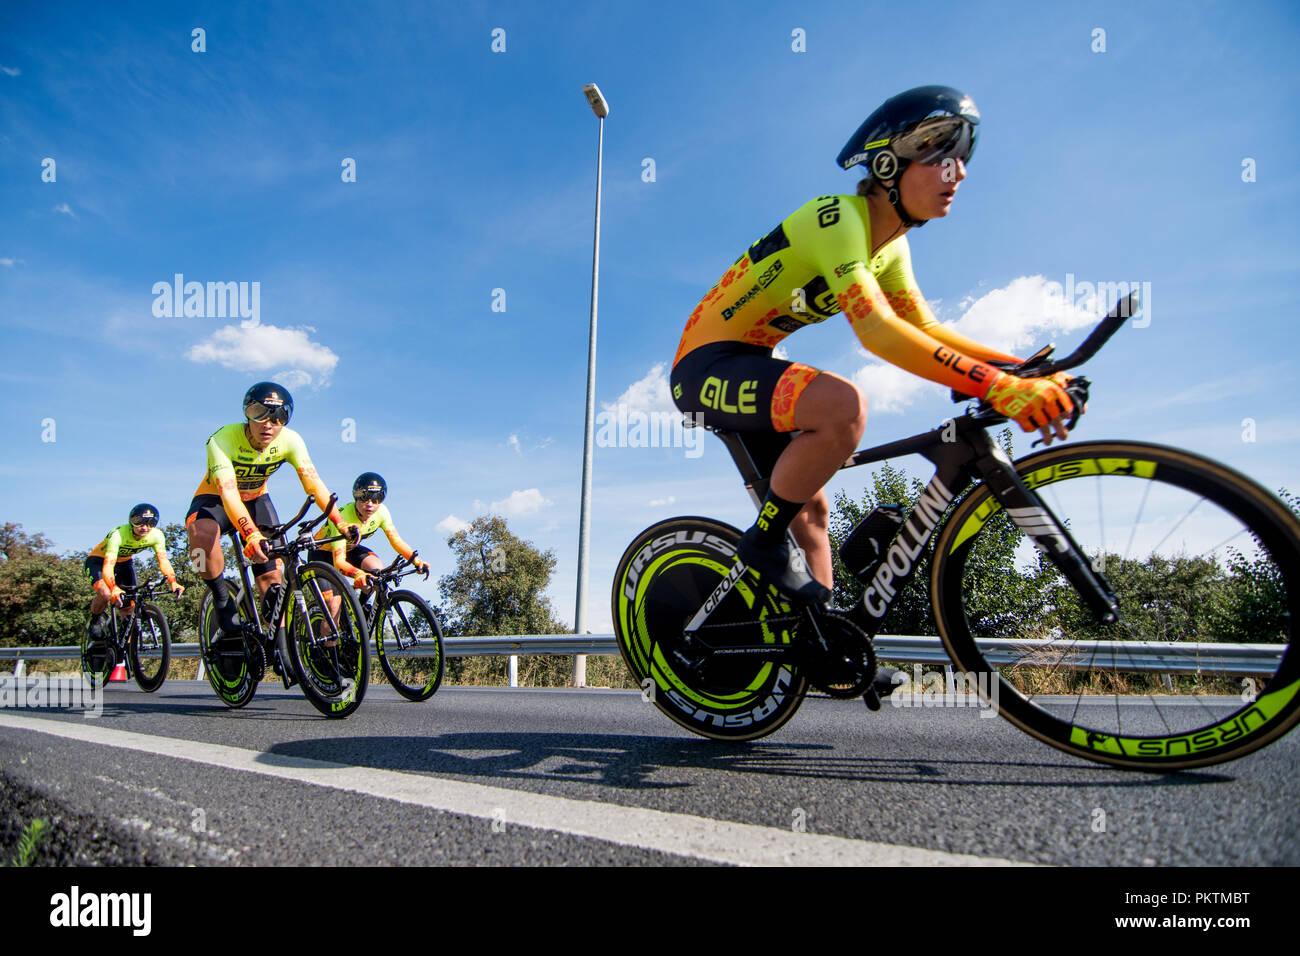 Boadilla del Monte, Spain. 15th September, 2018. Cyclists of 'Ale  Cipollini' rides during team time trial